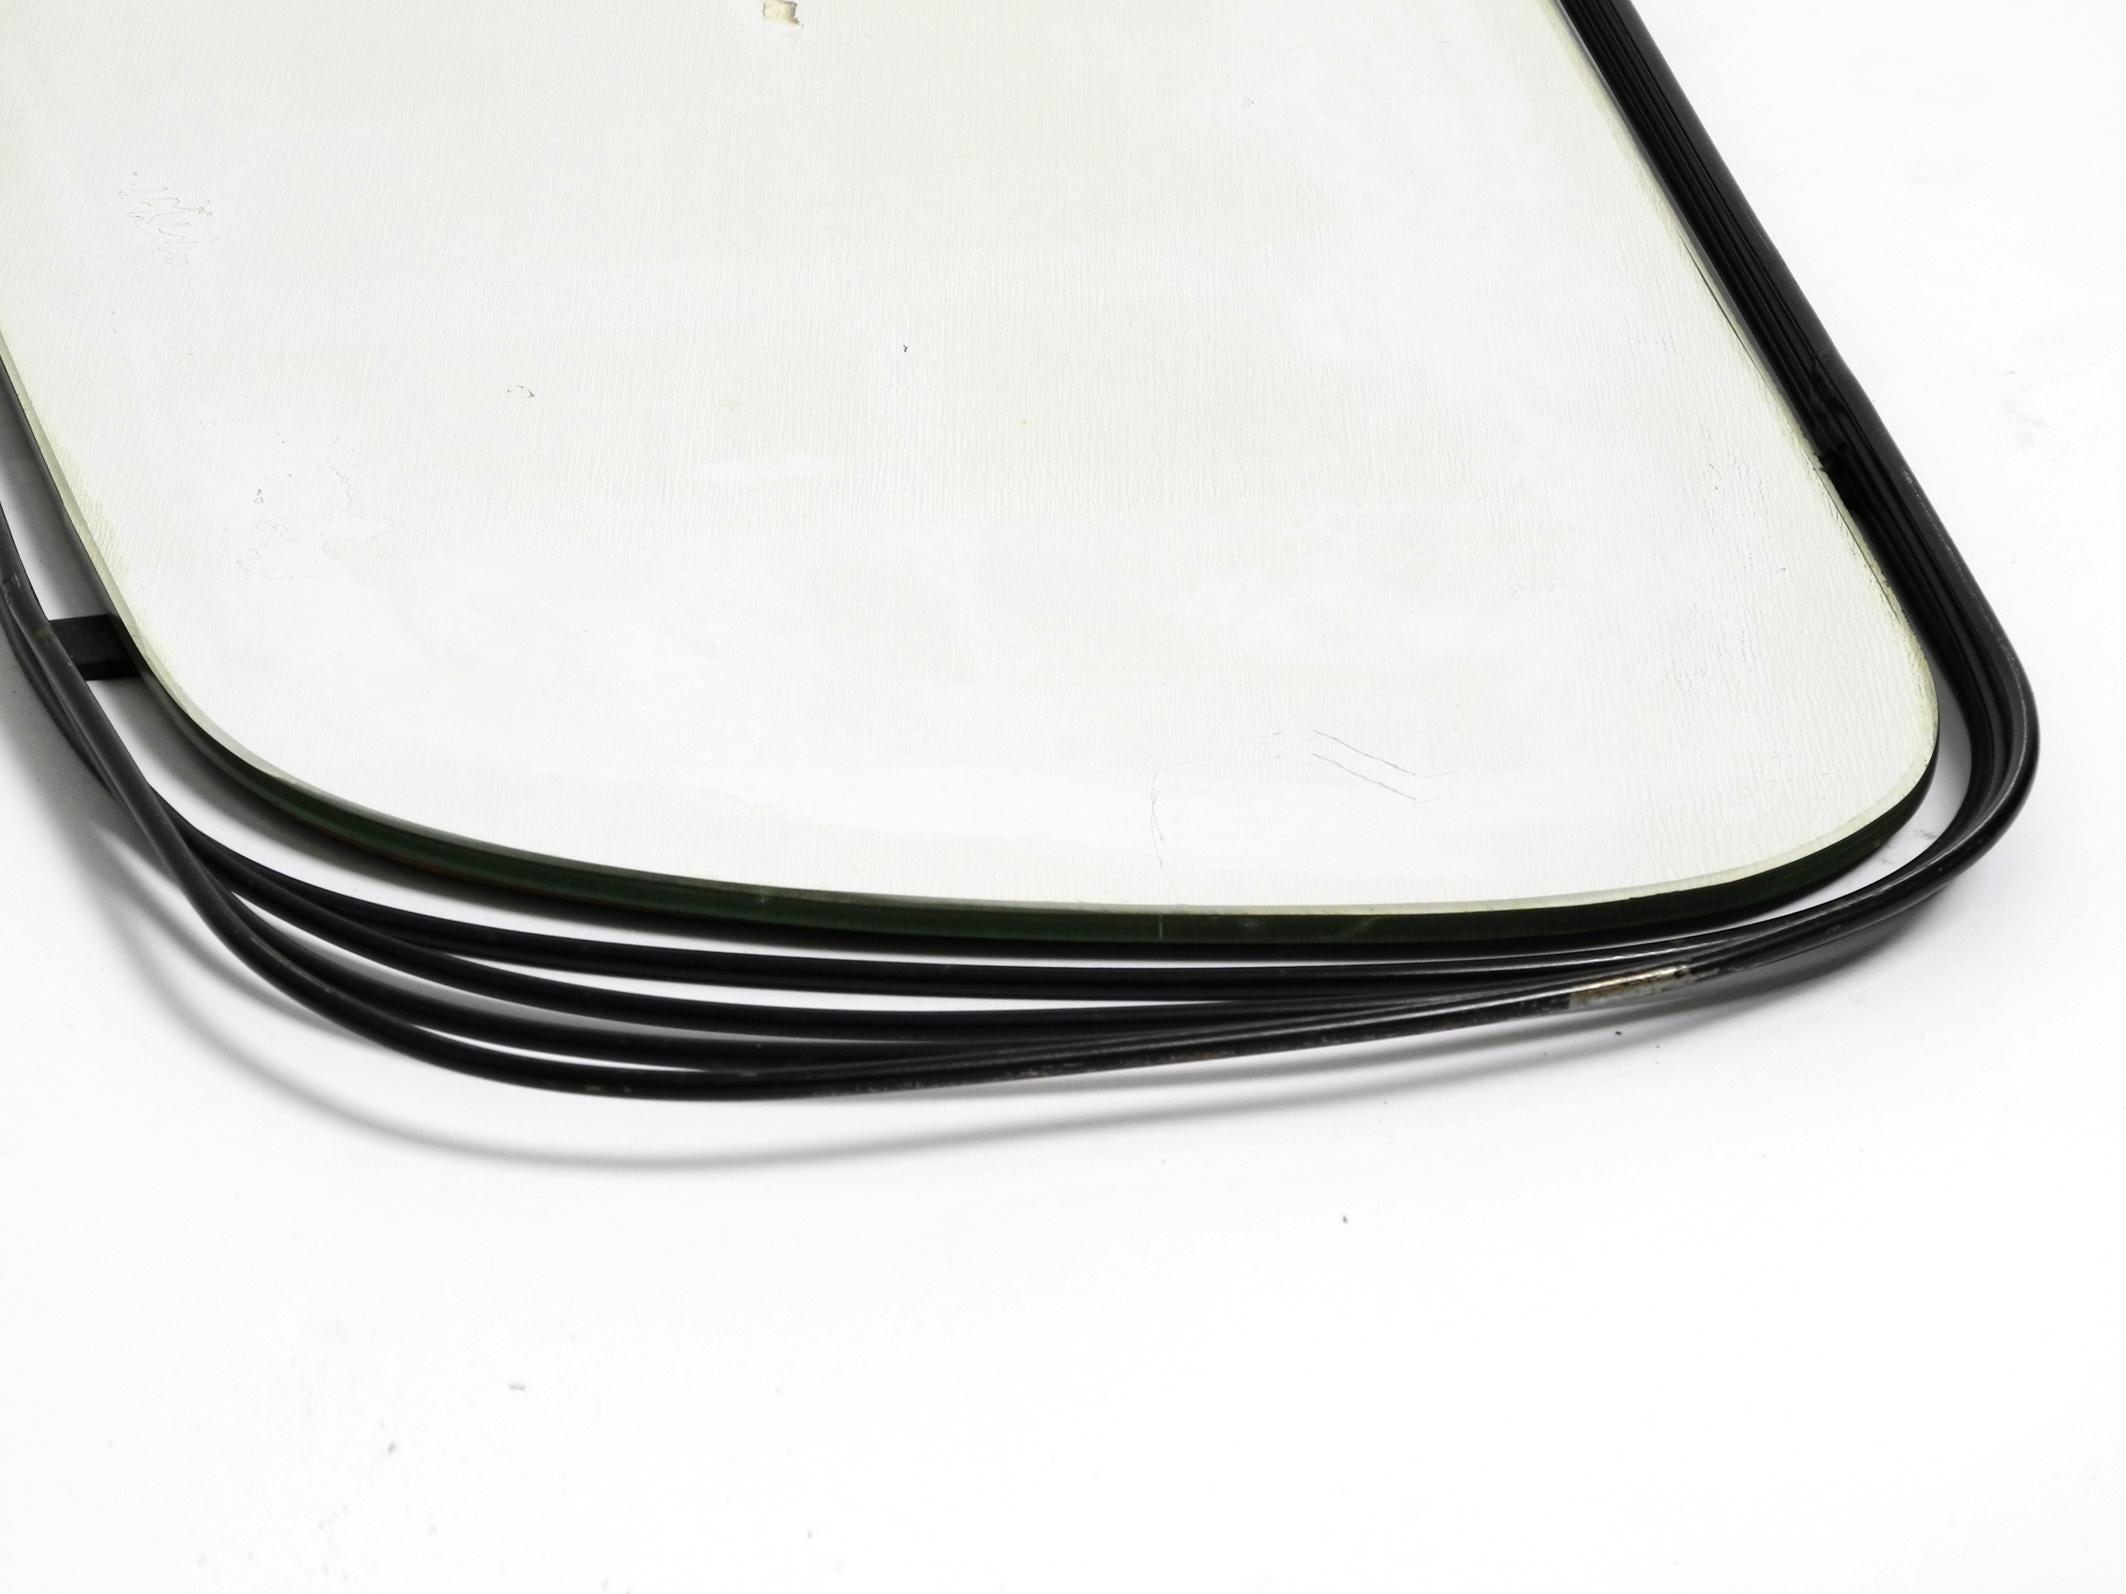 Rare Heavy Mid-Century Modern Wall Mirror with a Black Abstract Metal Frame For Sale 2